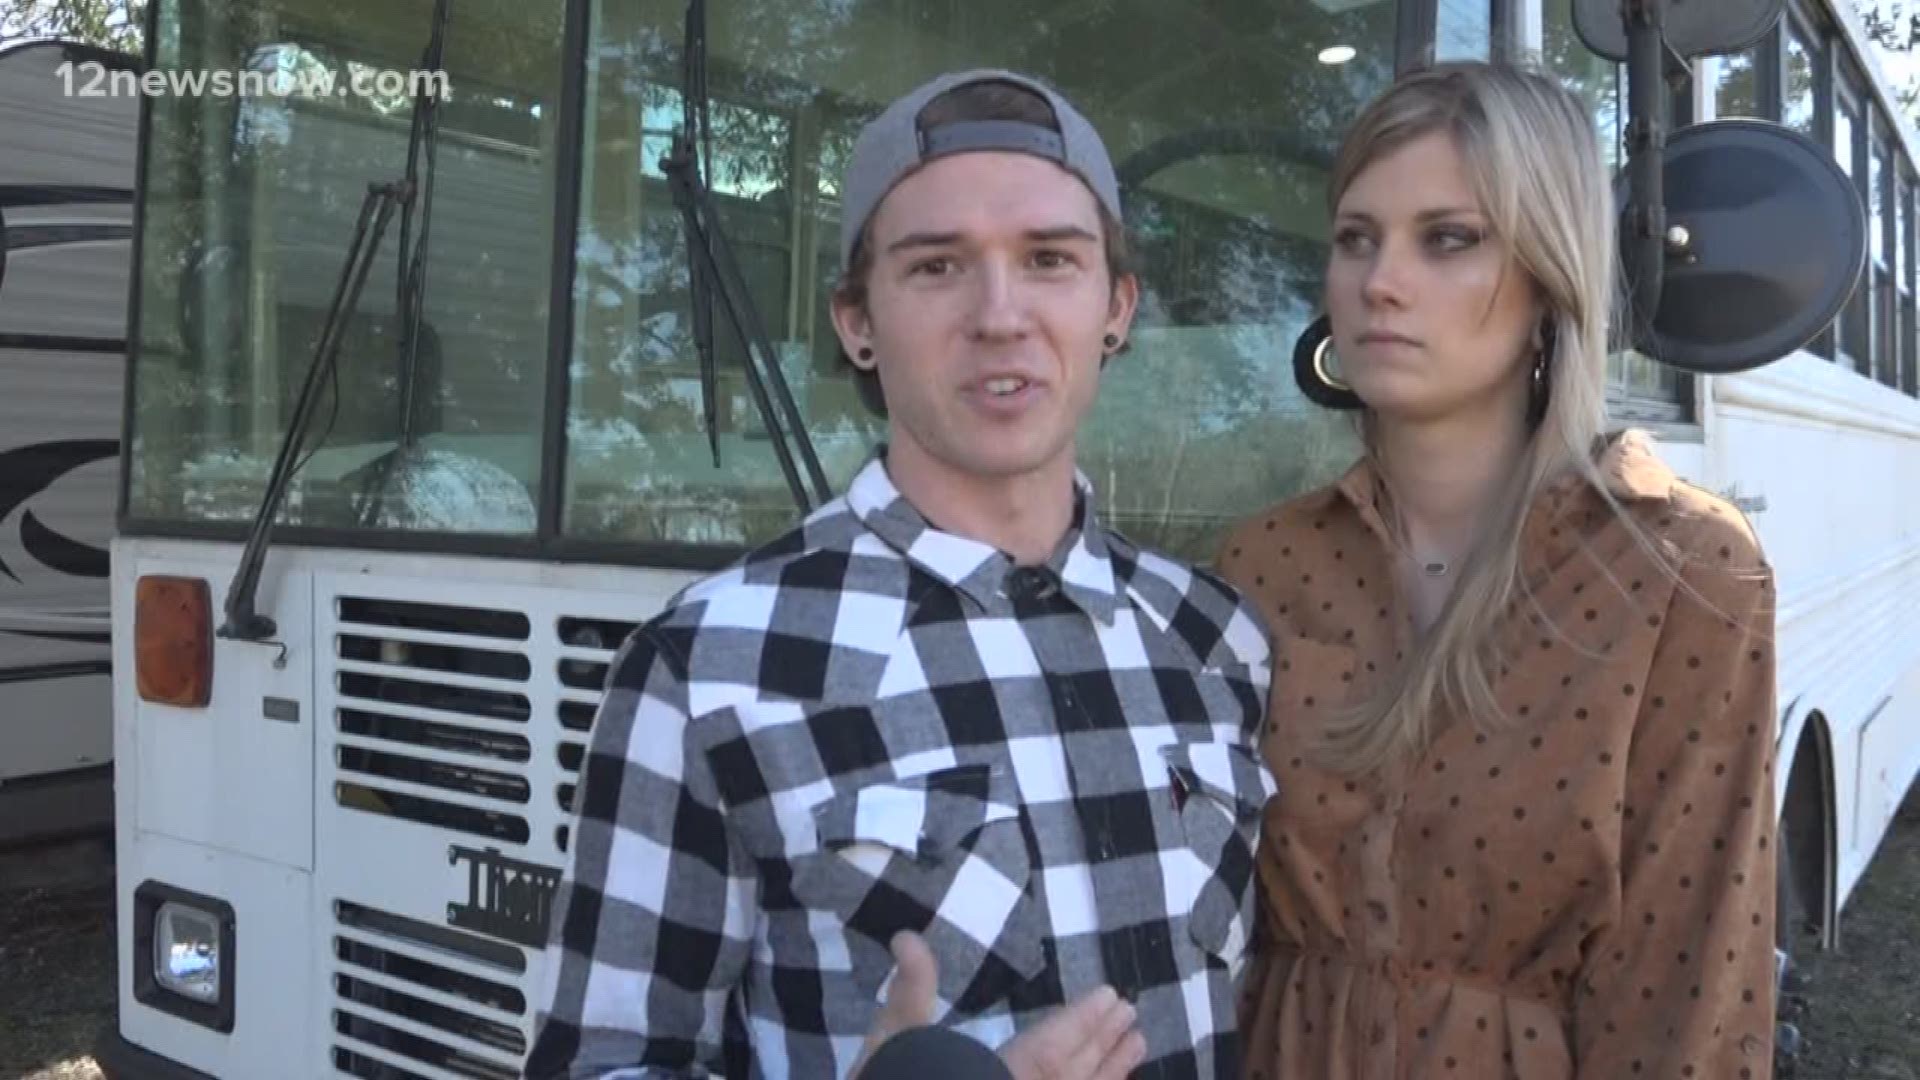 Couple has spent nearly $30,000 to transform the bus into a home.